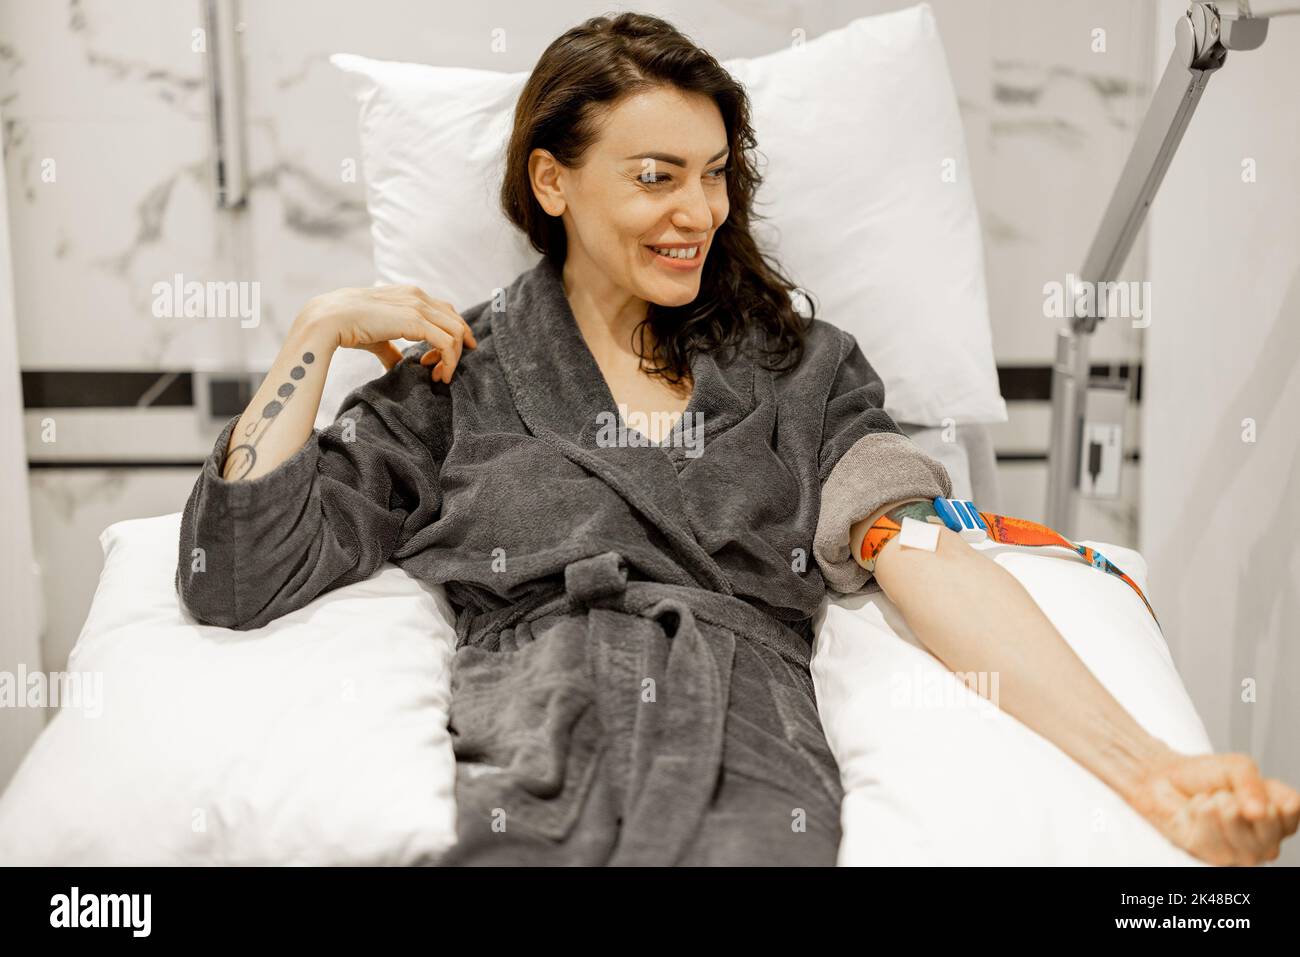 Happy woman in bathrobe after blood test procedure Stock Photo